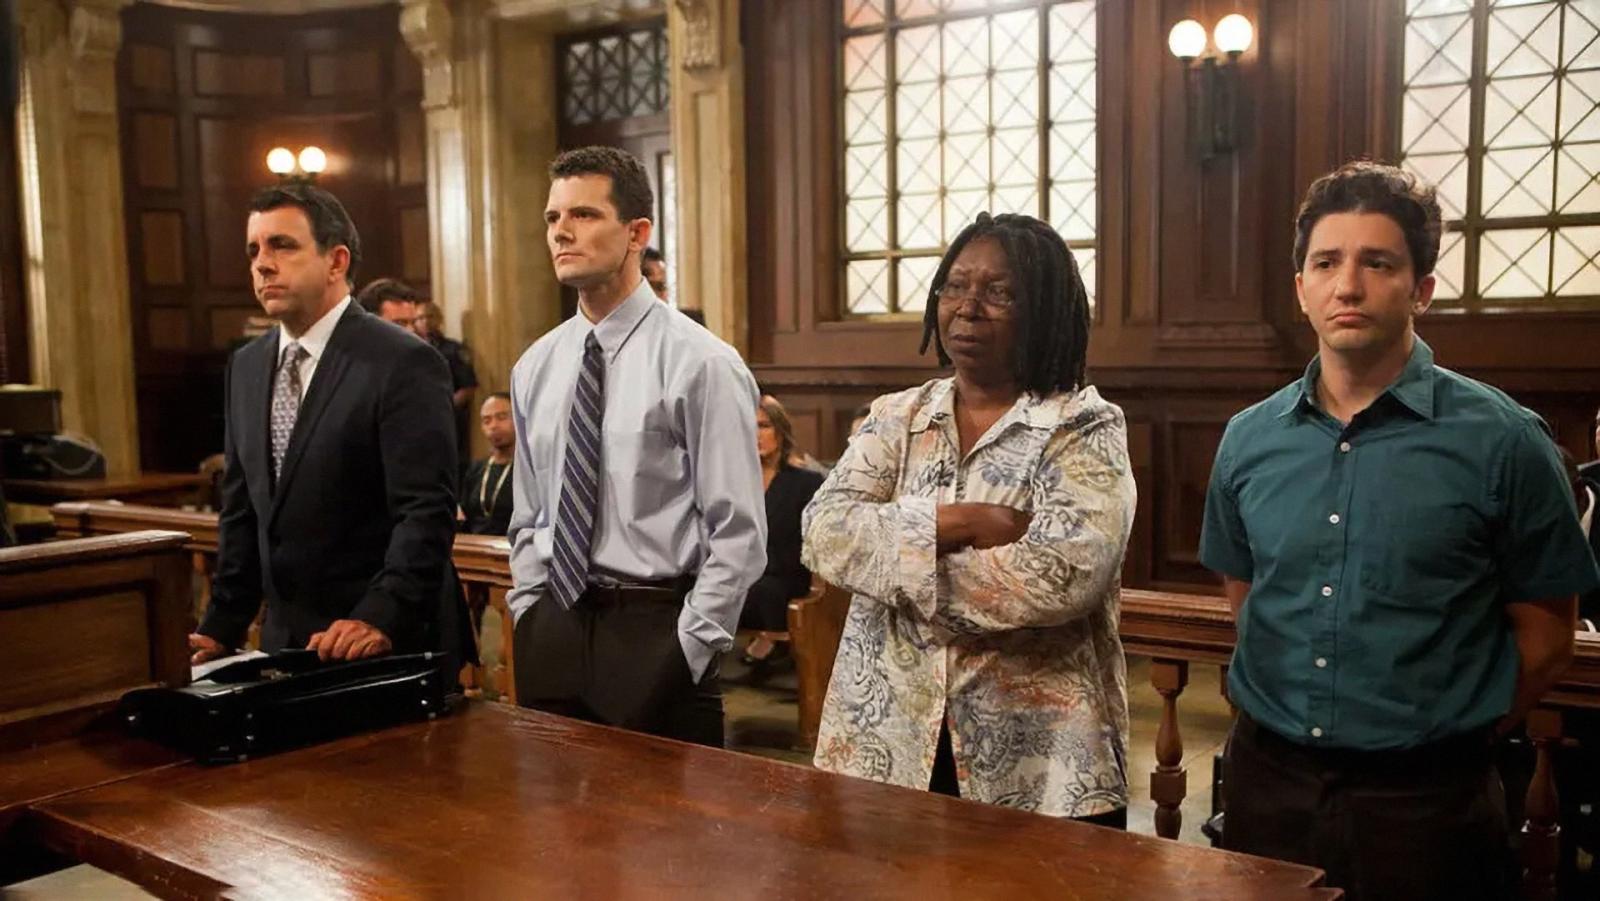 Did SVU Go Too Far? 7 Controversial Guest Stars that Divided Fans - image 6